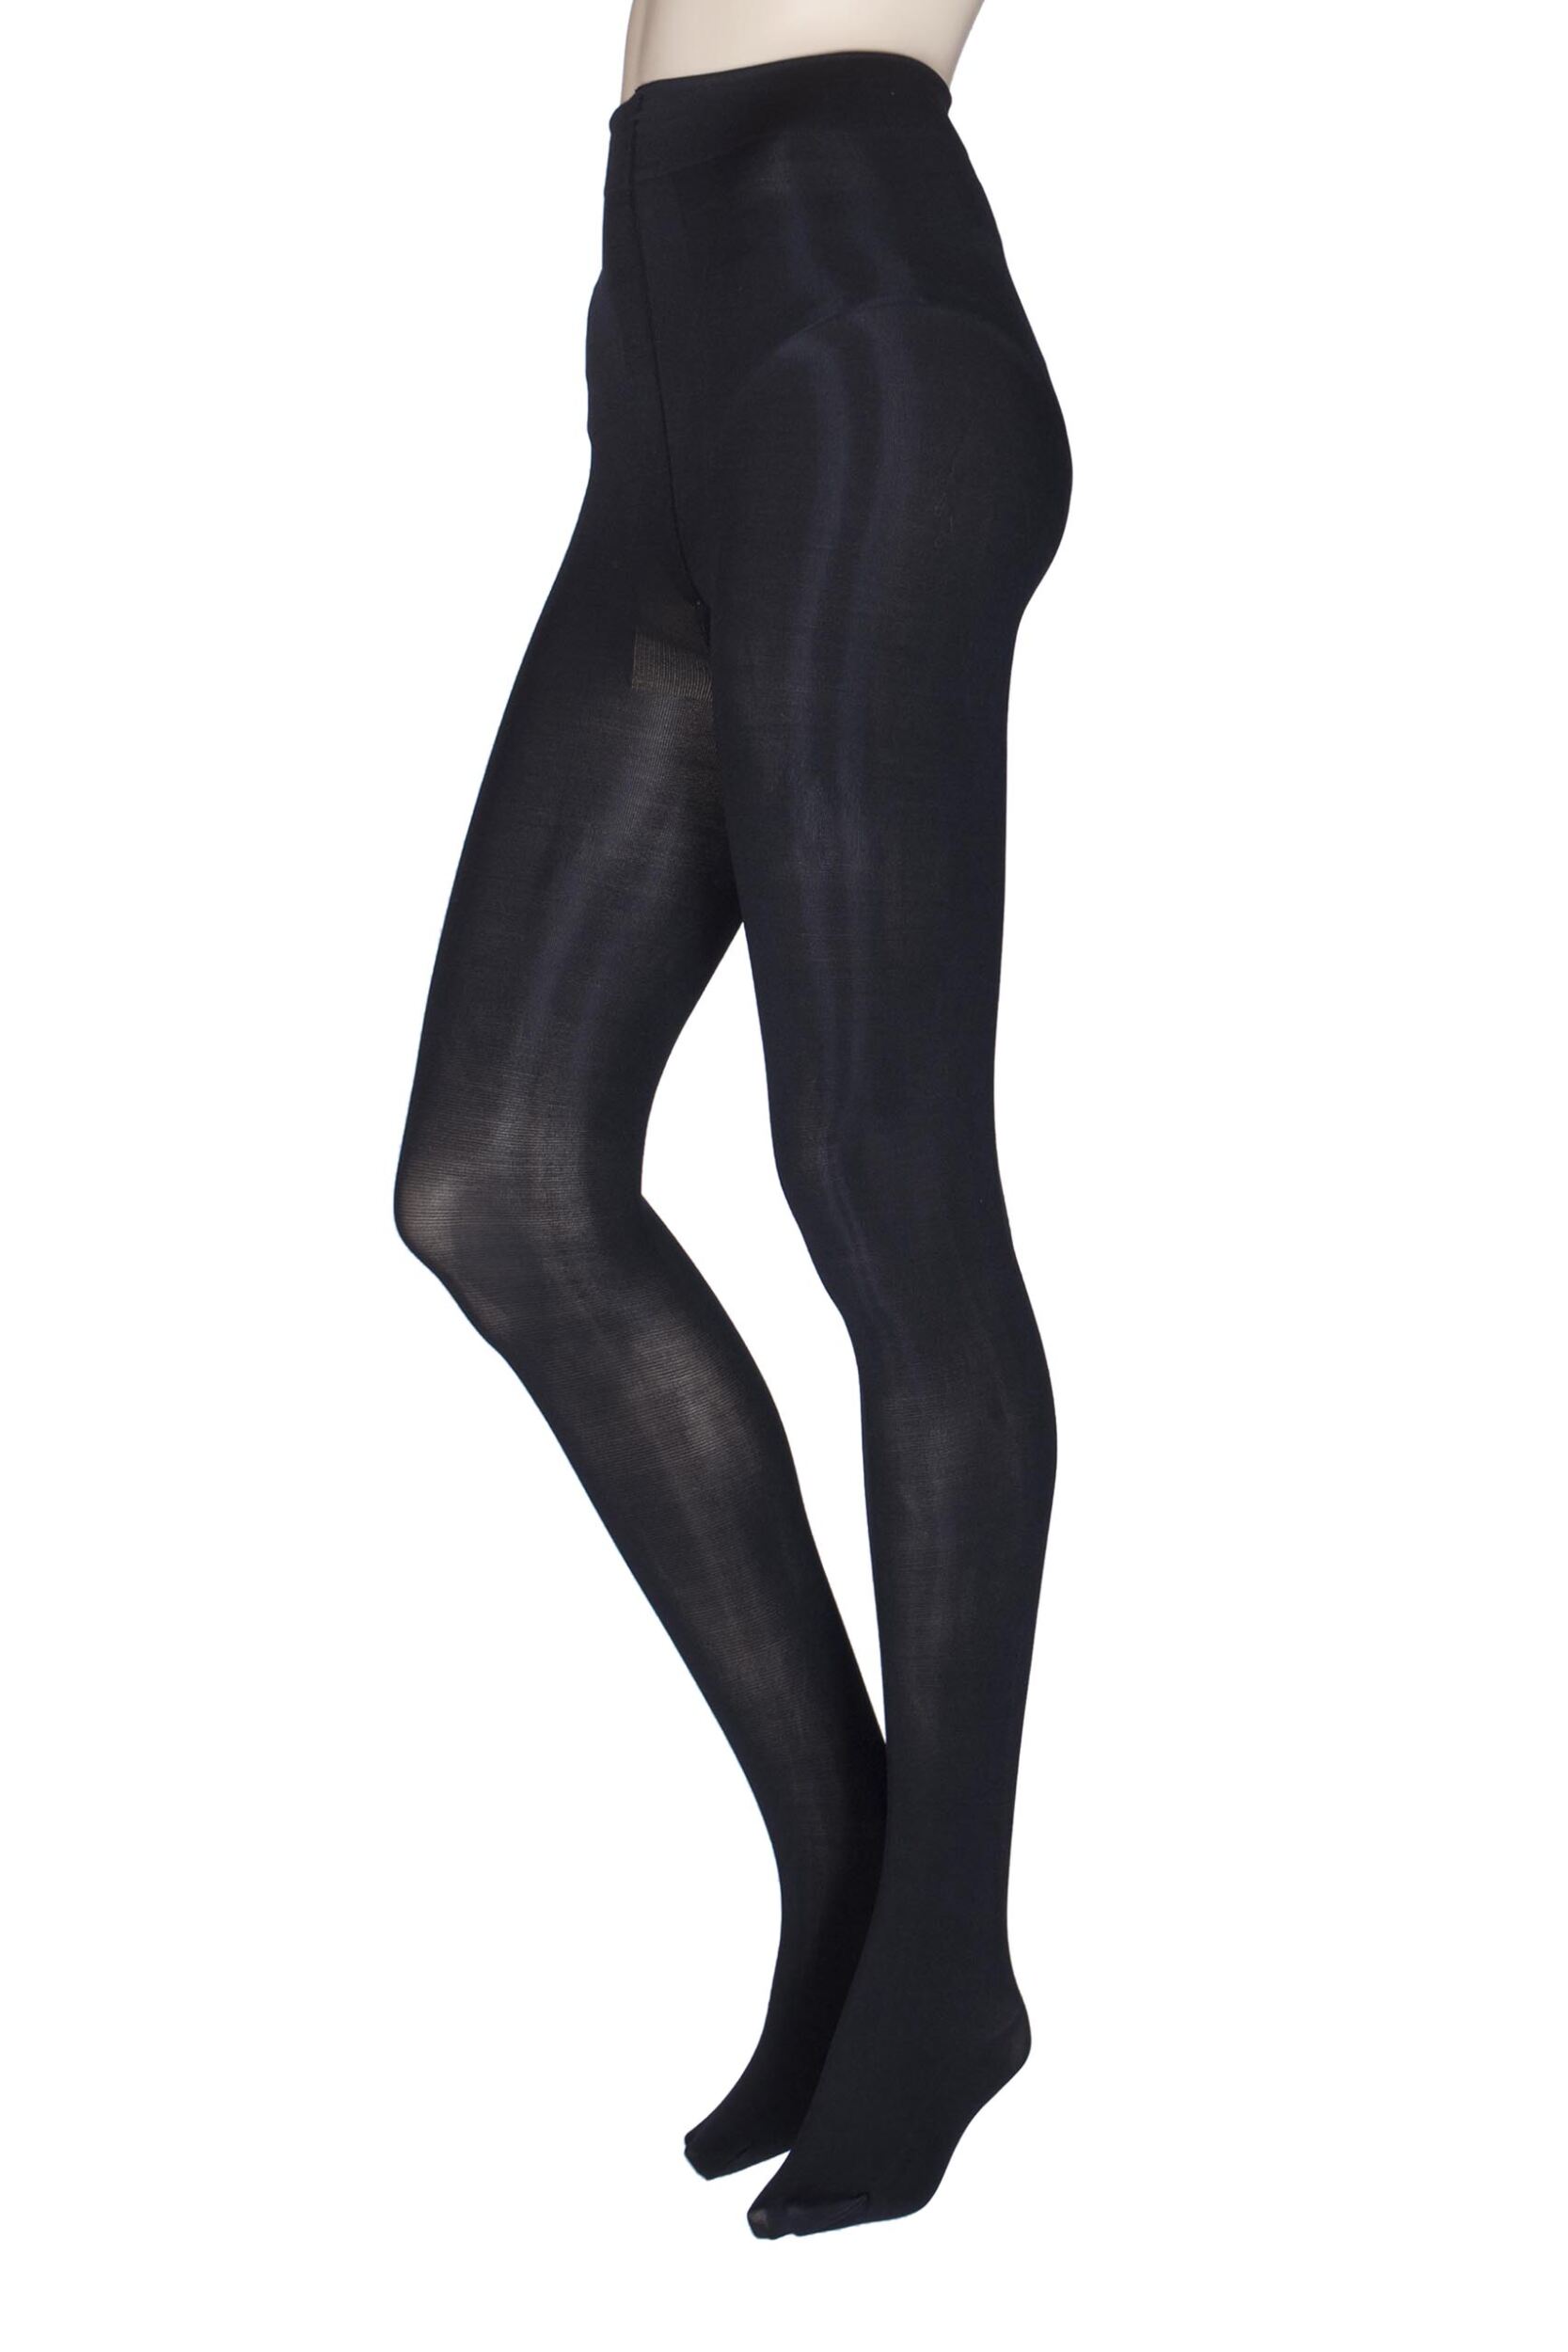 1 Pair Black Sara Recycled Nylon Opaque Tights Ladies Small - Thought